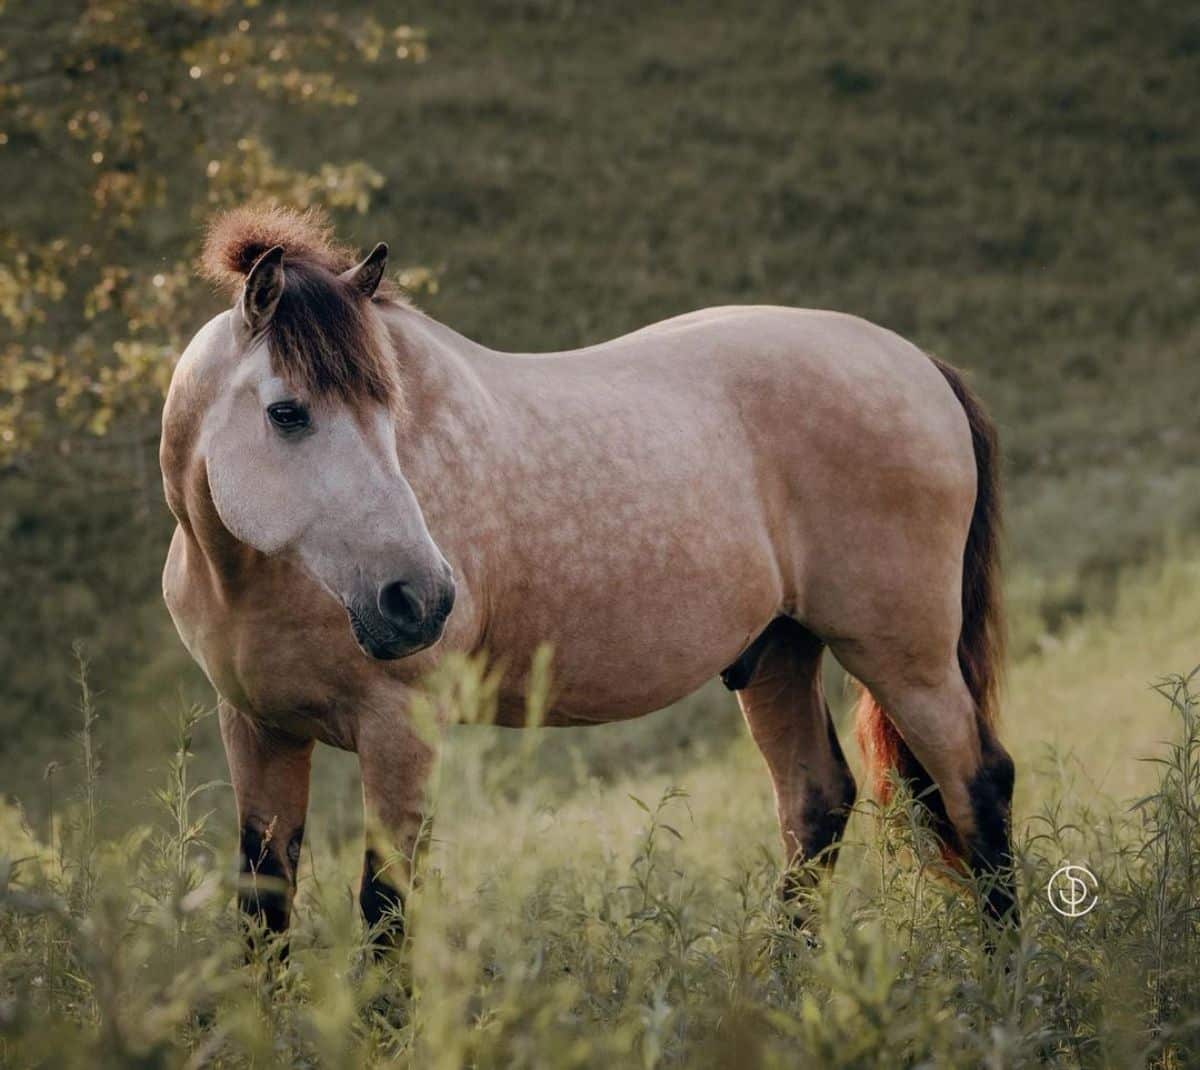 An adorable speckled Bashkir horse stands on a field.